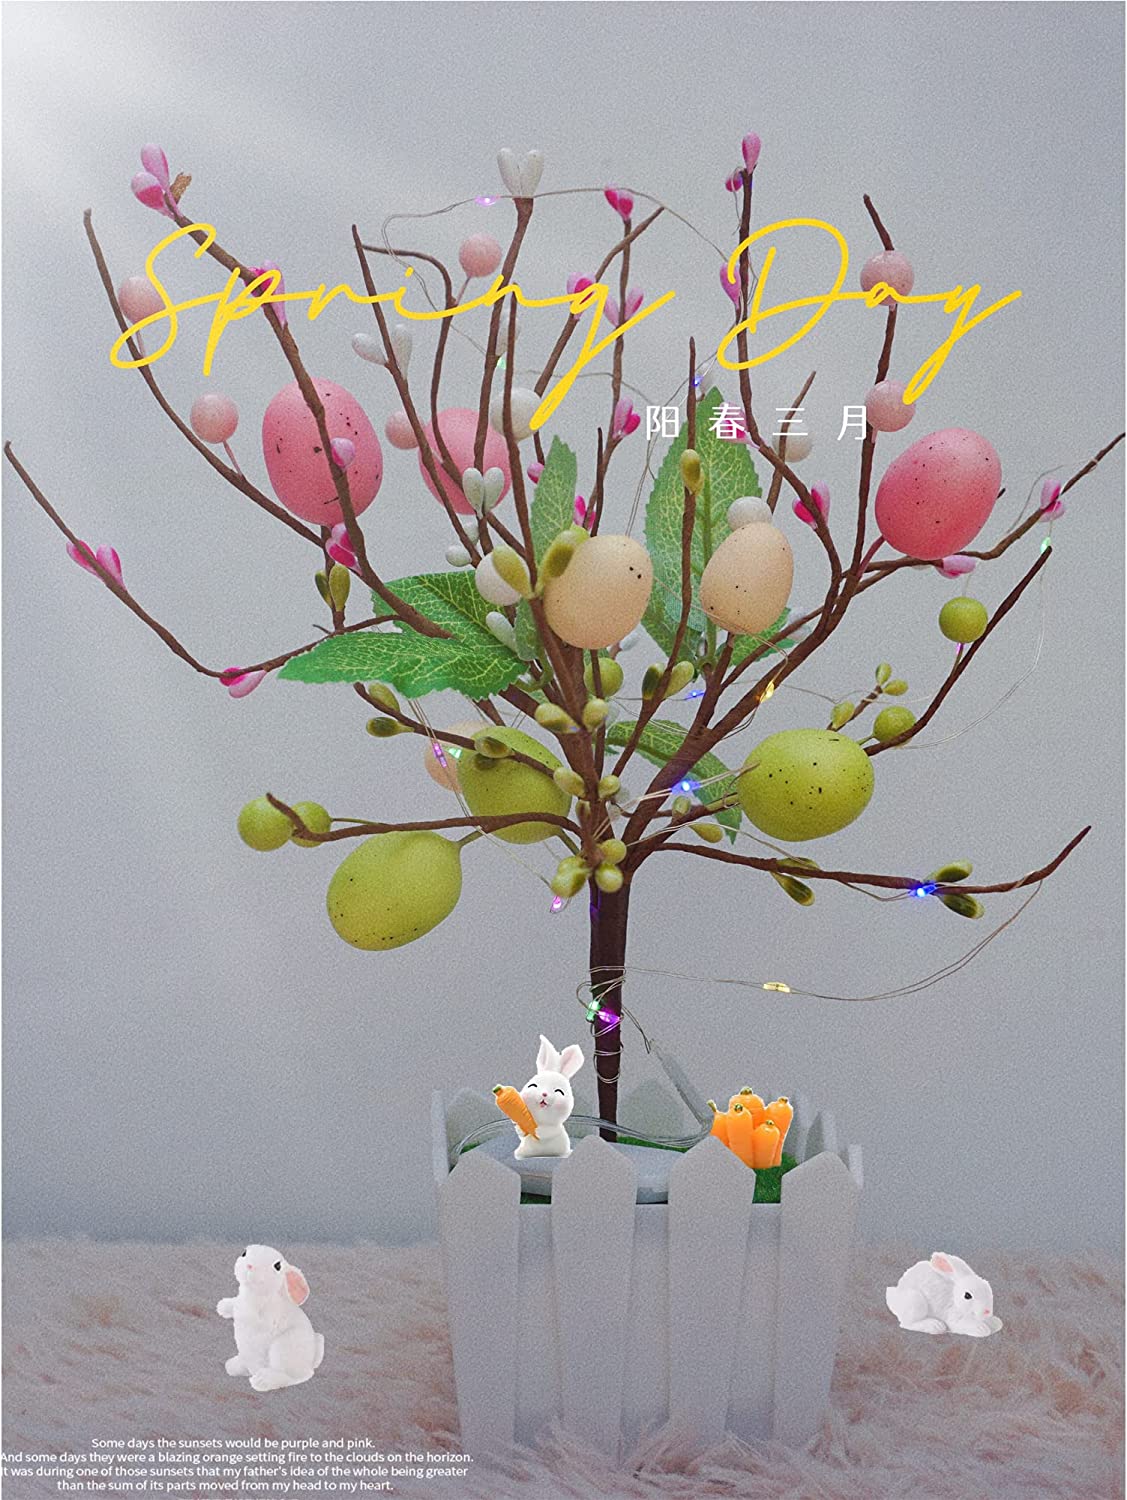 New Easter Decorations 13 Inch Artificial Easter Egg Tree Colorful Light with Fake Planter Pot for Home Spring Decoration (White-Basket)